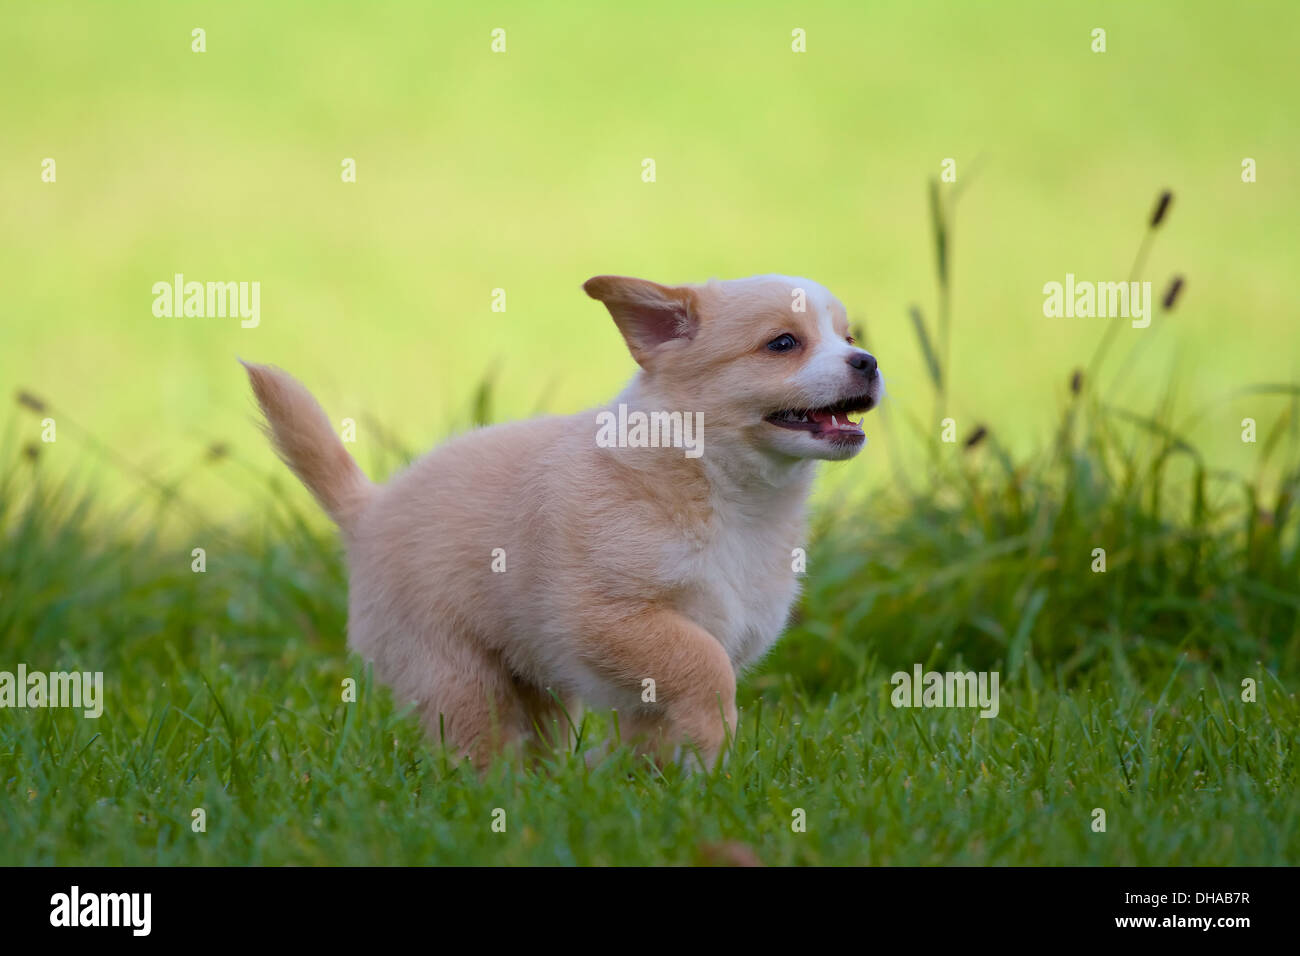 A small 7 weeks old puppy from accelerated heart's content at top speed. Stock Photo